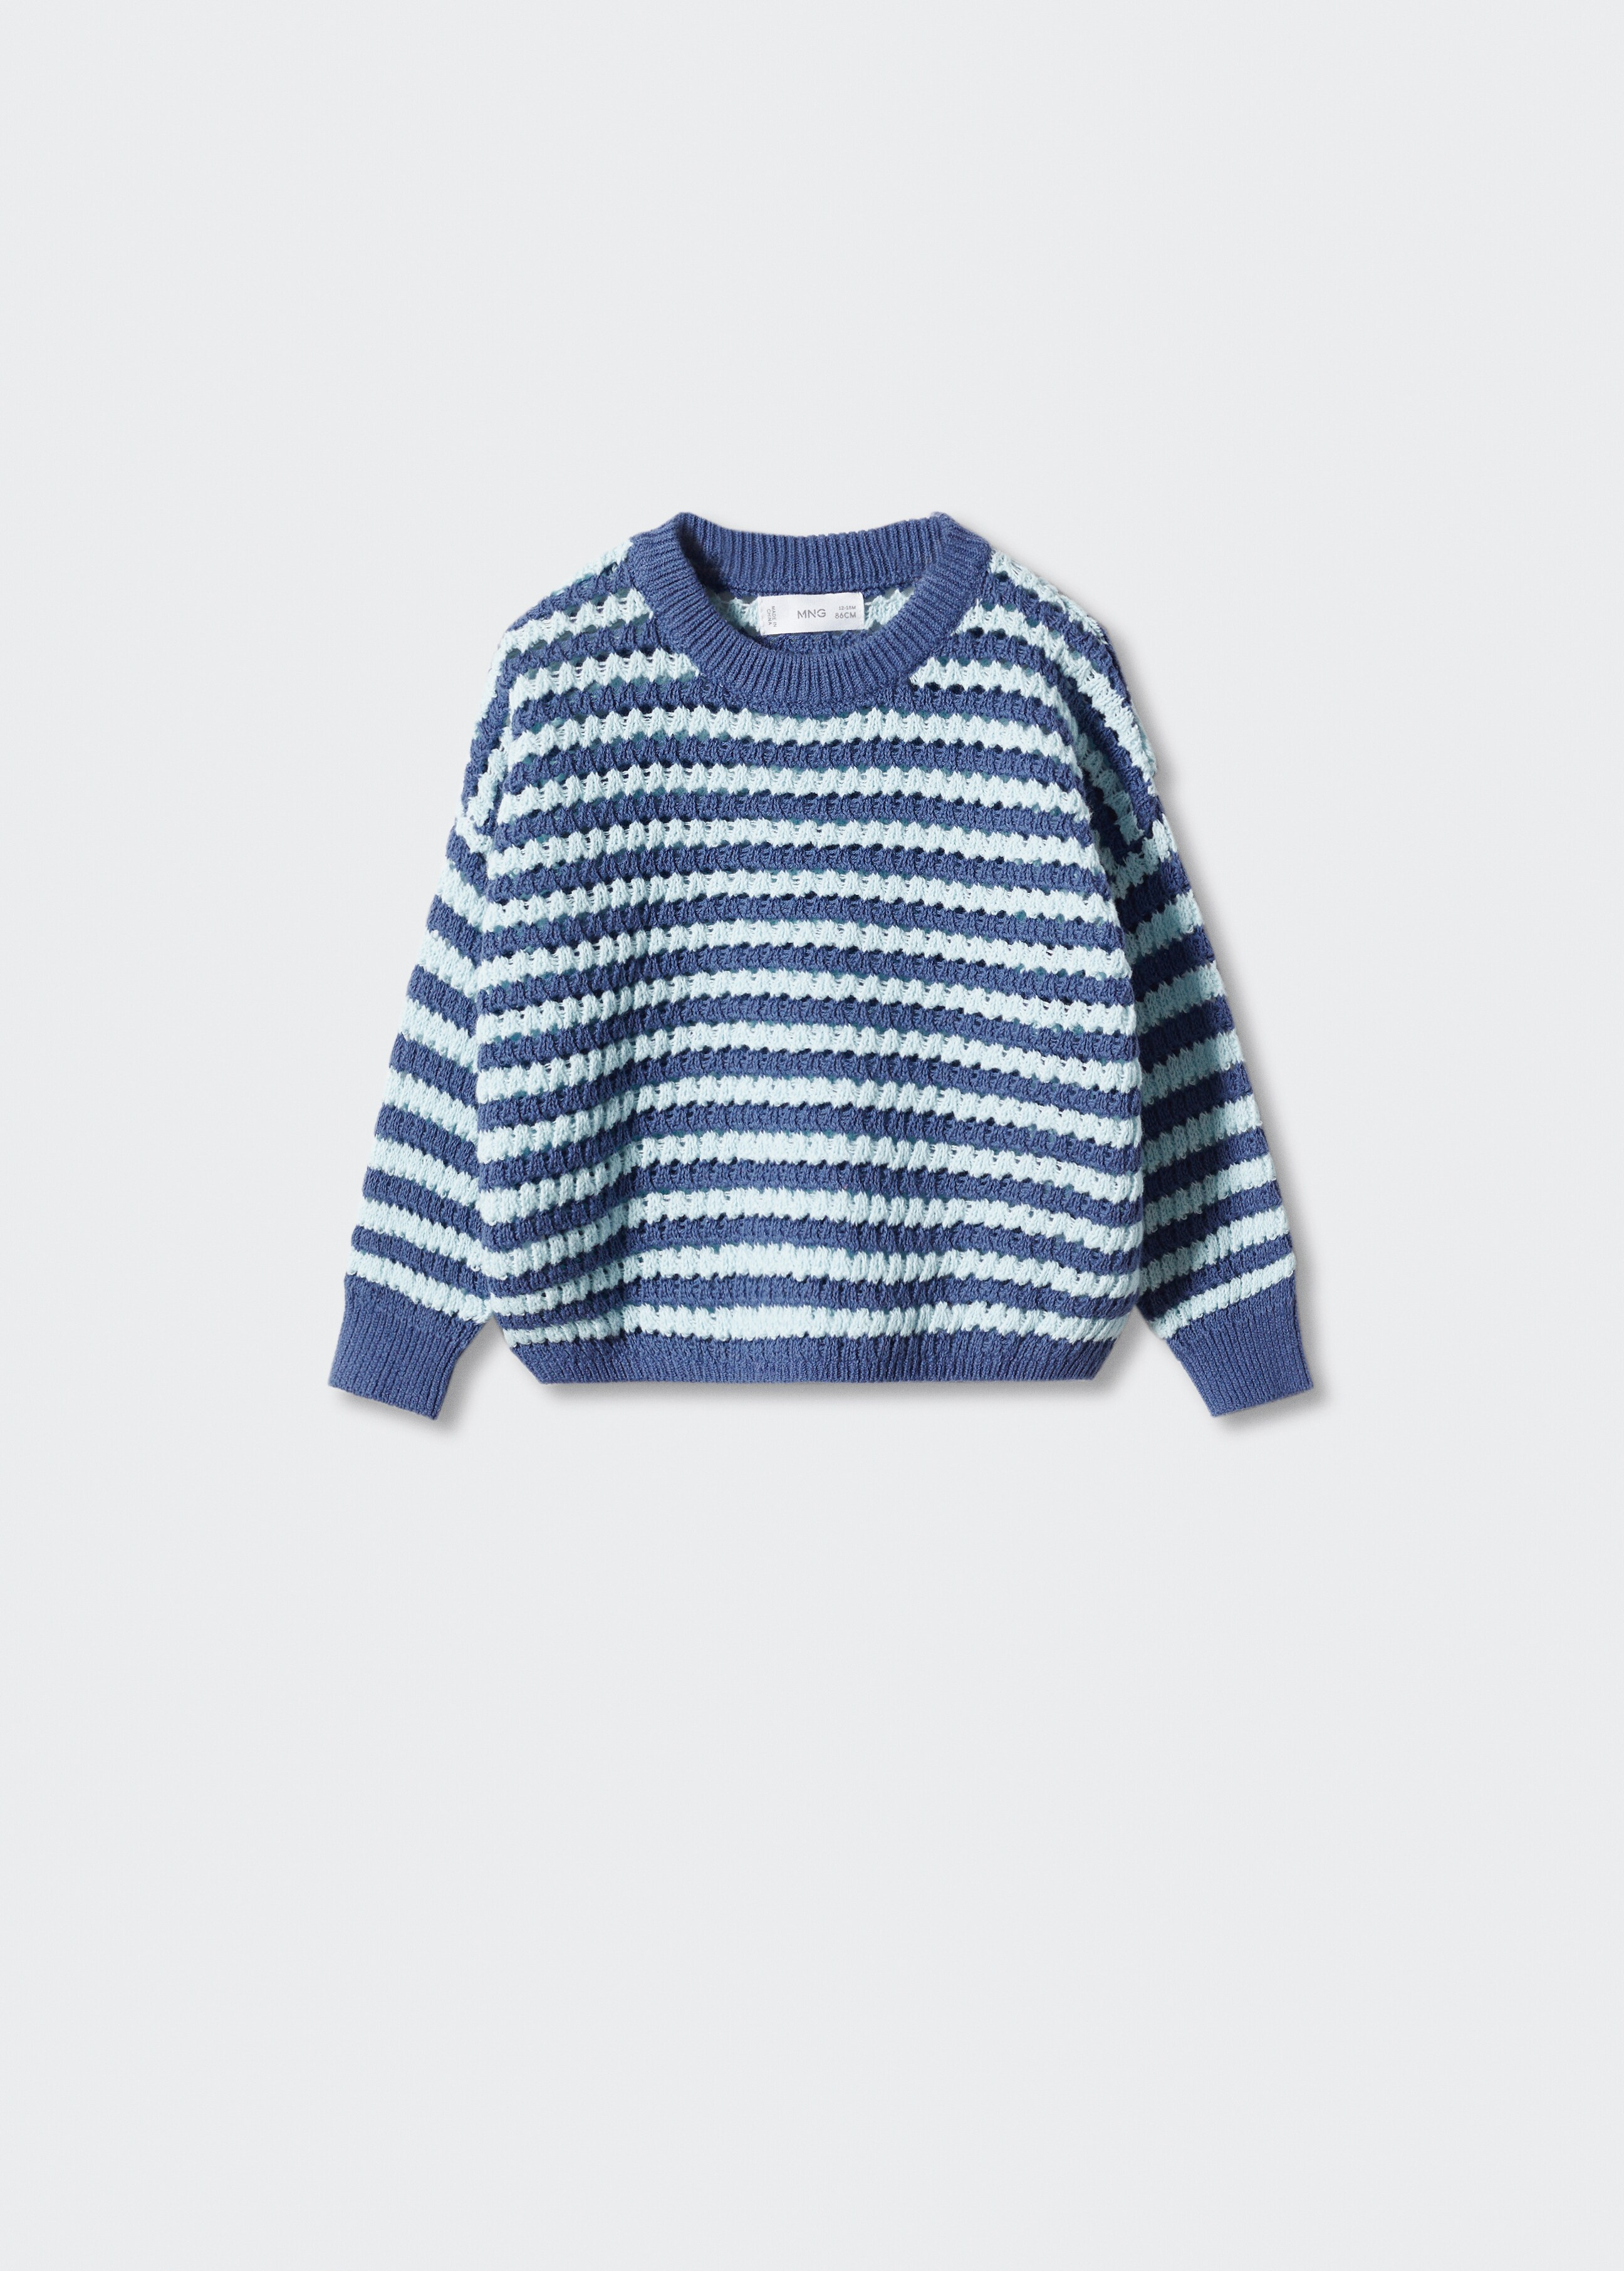 Striped openwork knit sweater - Article without model